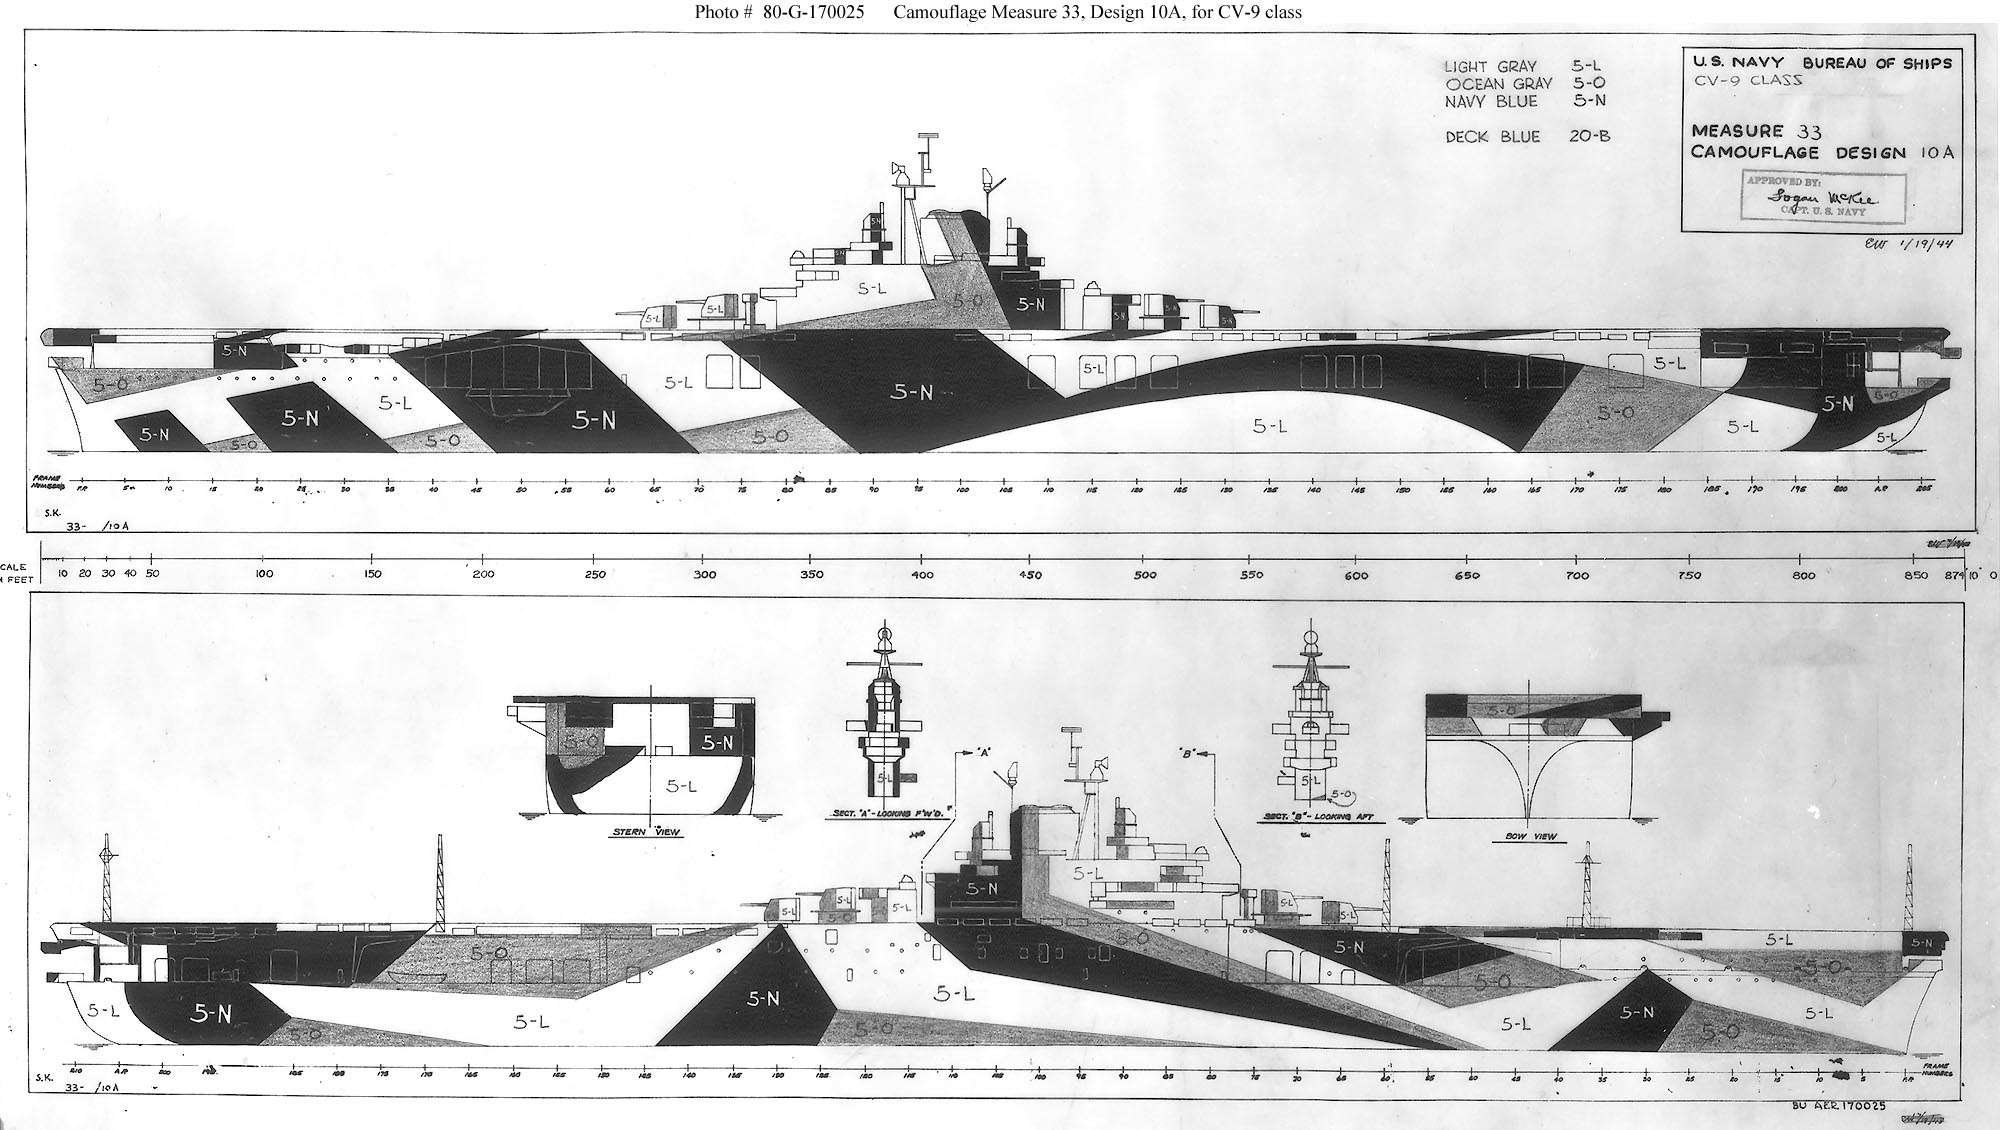 1944-45 plan for camouflage Measure 33, Design 10a on Essex-class fleet carriers. Of the 17 Essex-class carriers to see service during 1944-45, 4 were painted according to this plan.